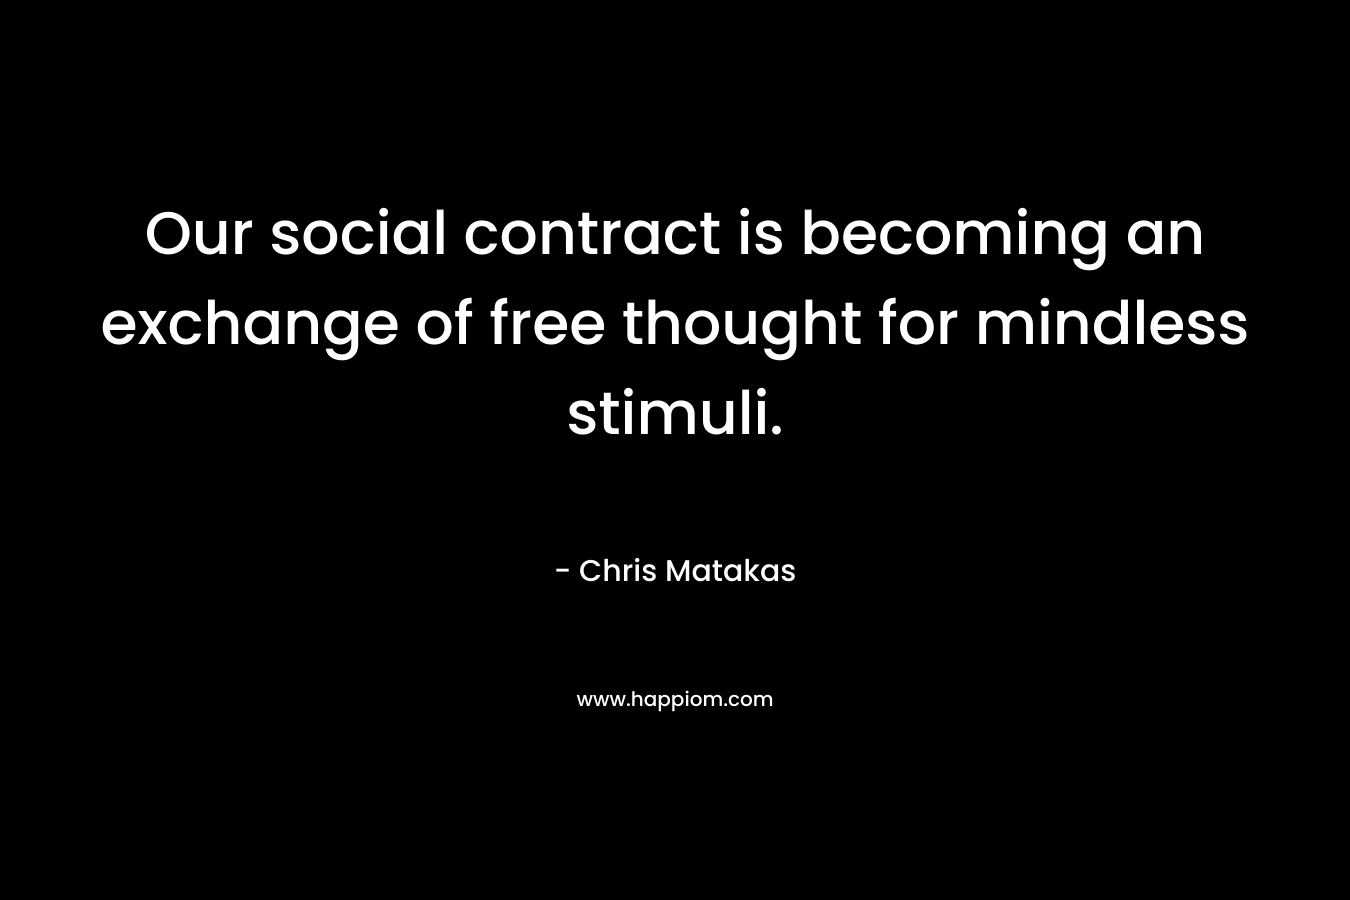 Our social contract is becoming an exchange of free thought for mindless stimuli. – Chris Matakas